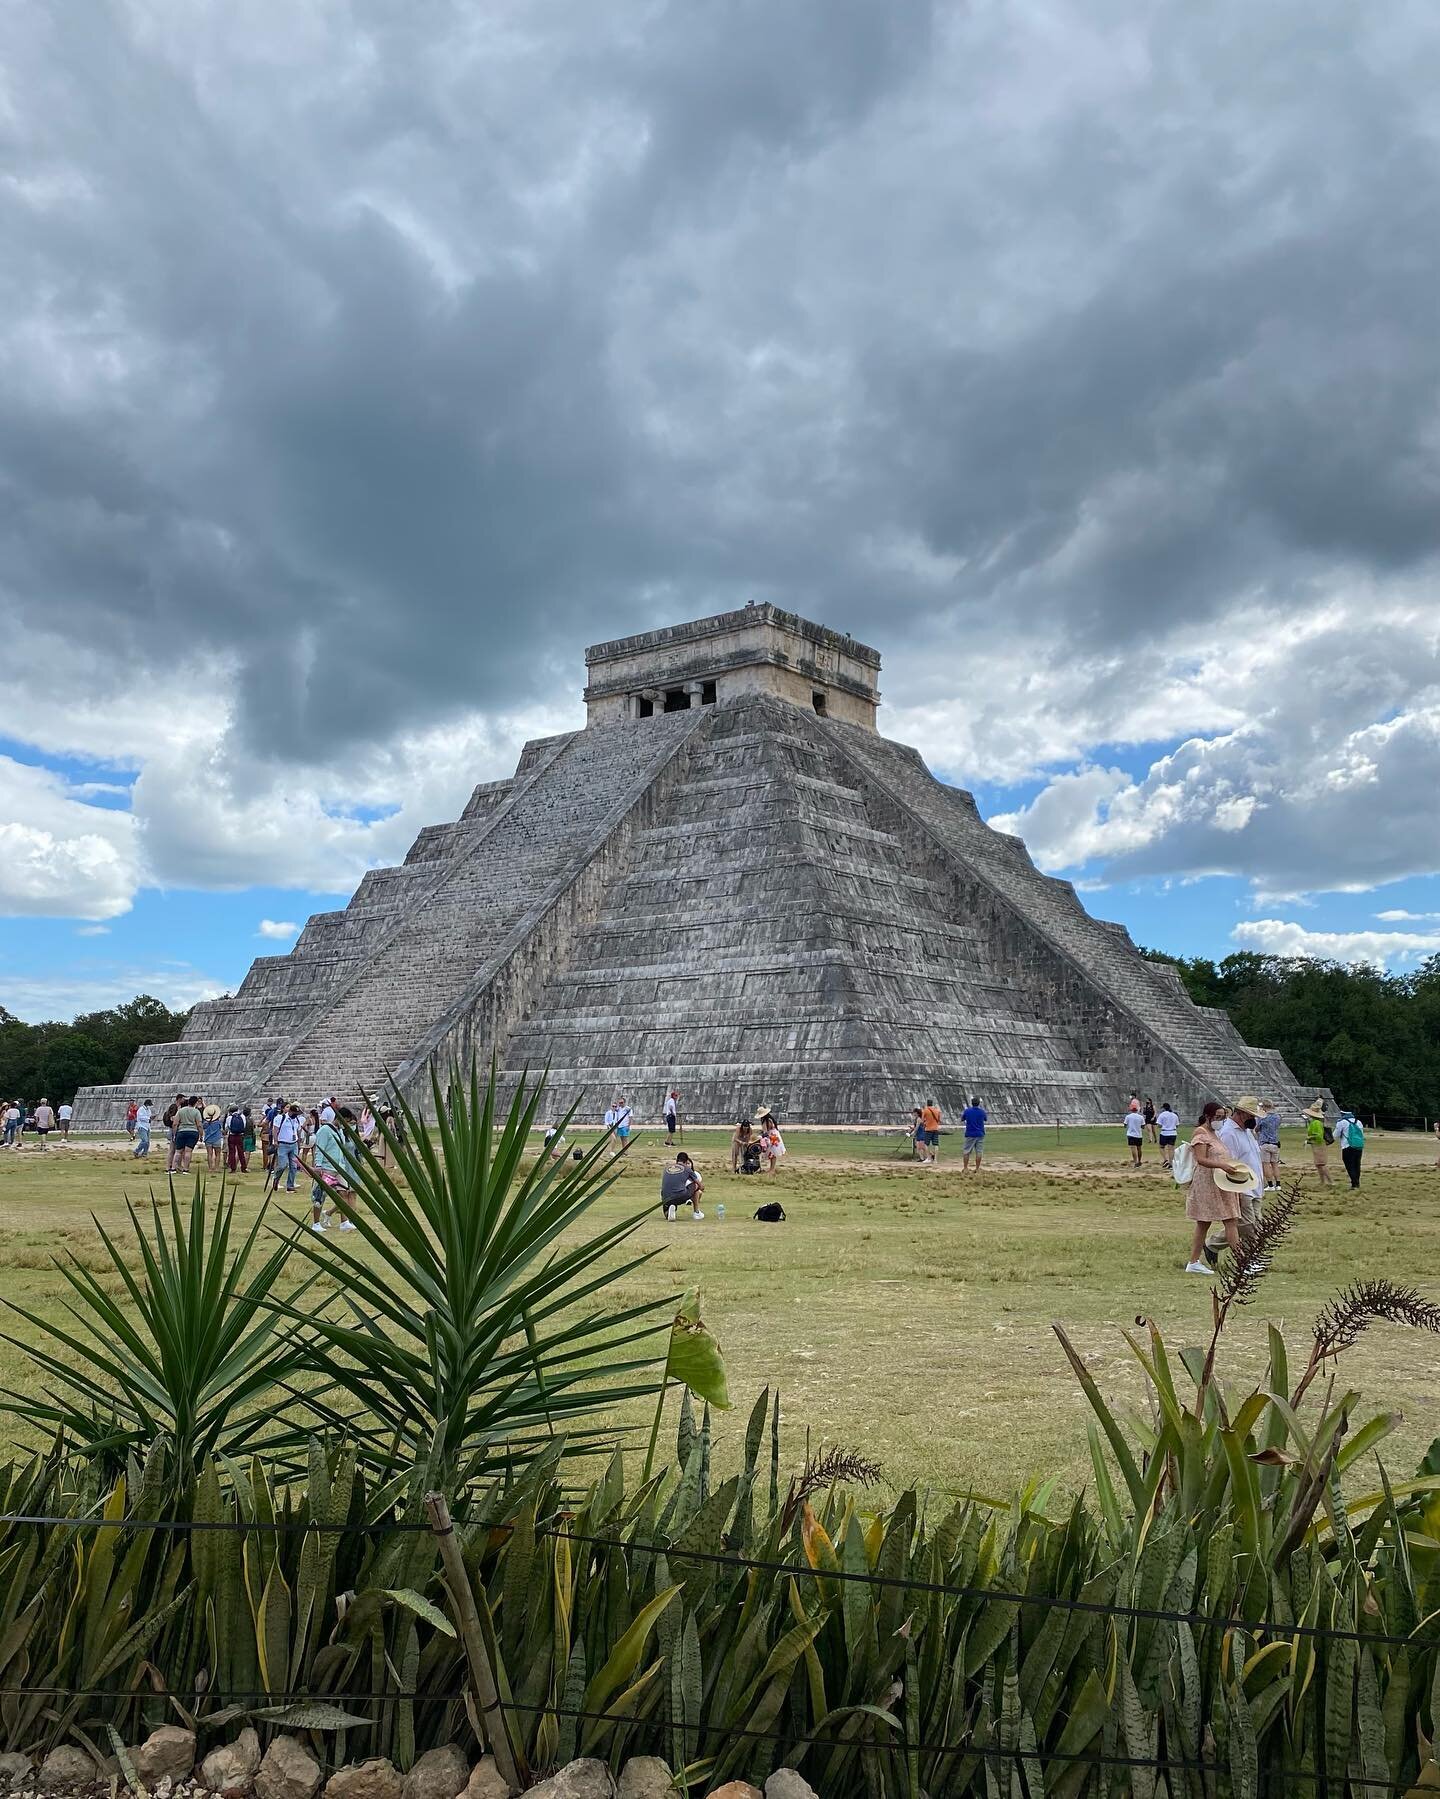 a humble thank you to the old ones, that we are able to walk these special lands and observe the ancient magic, astronomical wisdom, earthly reverence, sacrifice and creativity of the Maya. I&rsquo;ve wanted to see pyramids since I was small! 

Mucha